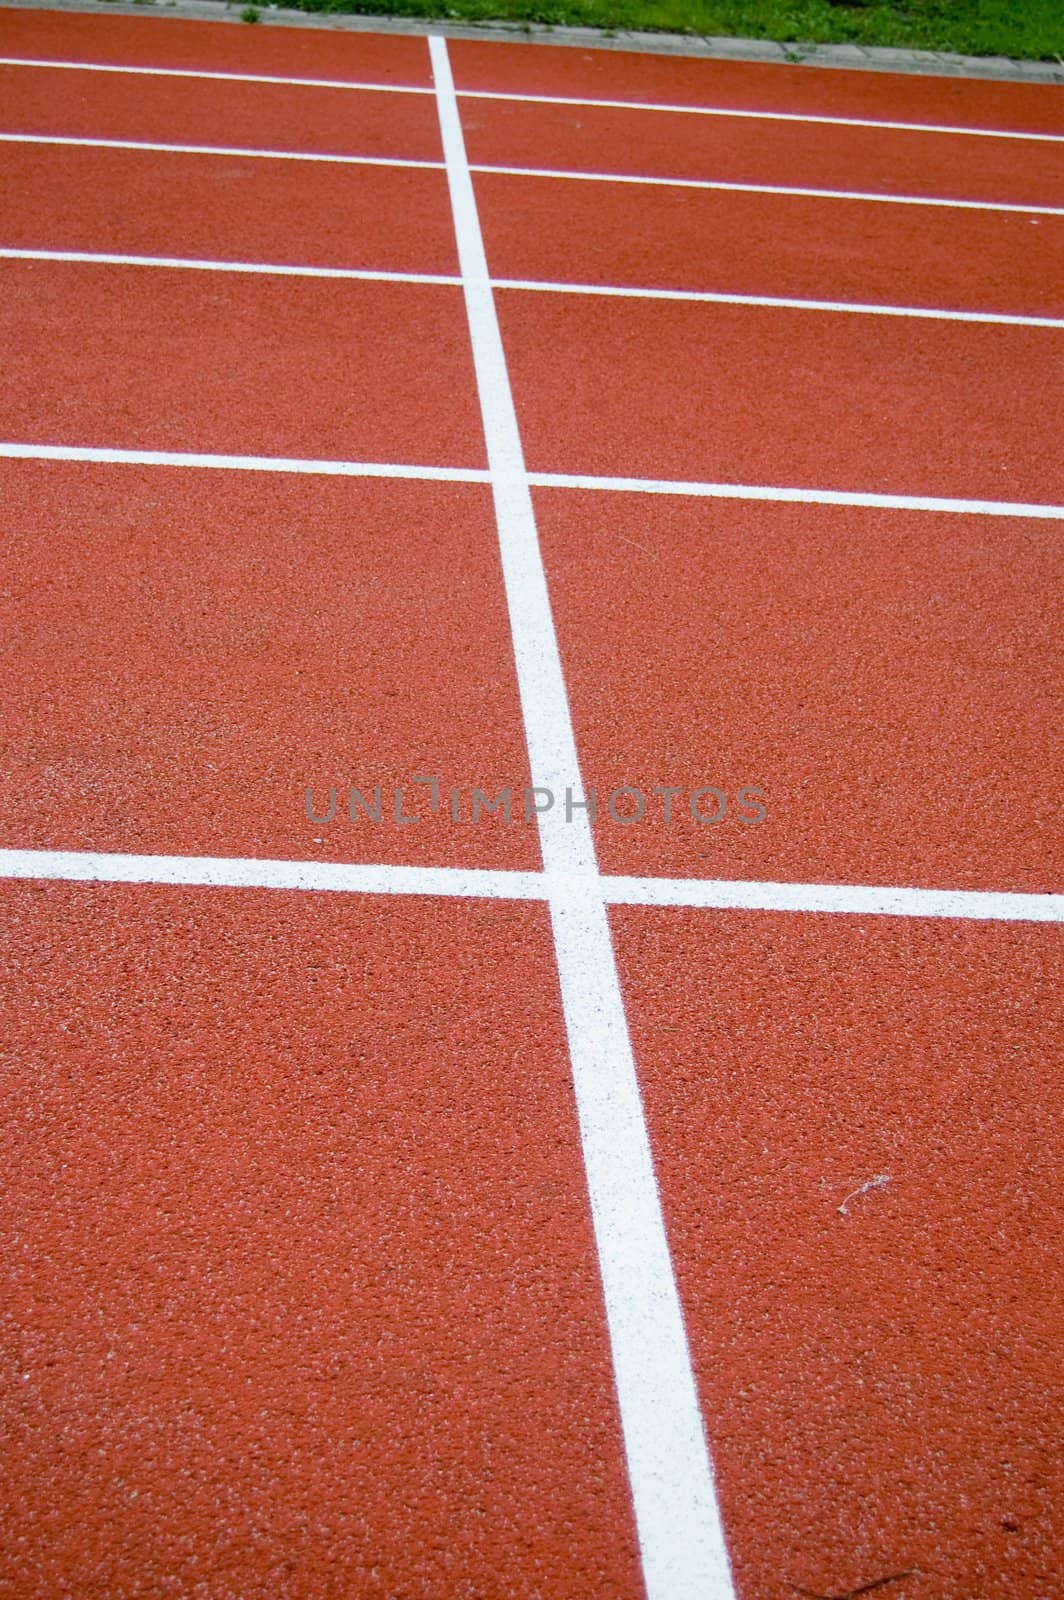 start of a sprint on a athletic track